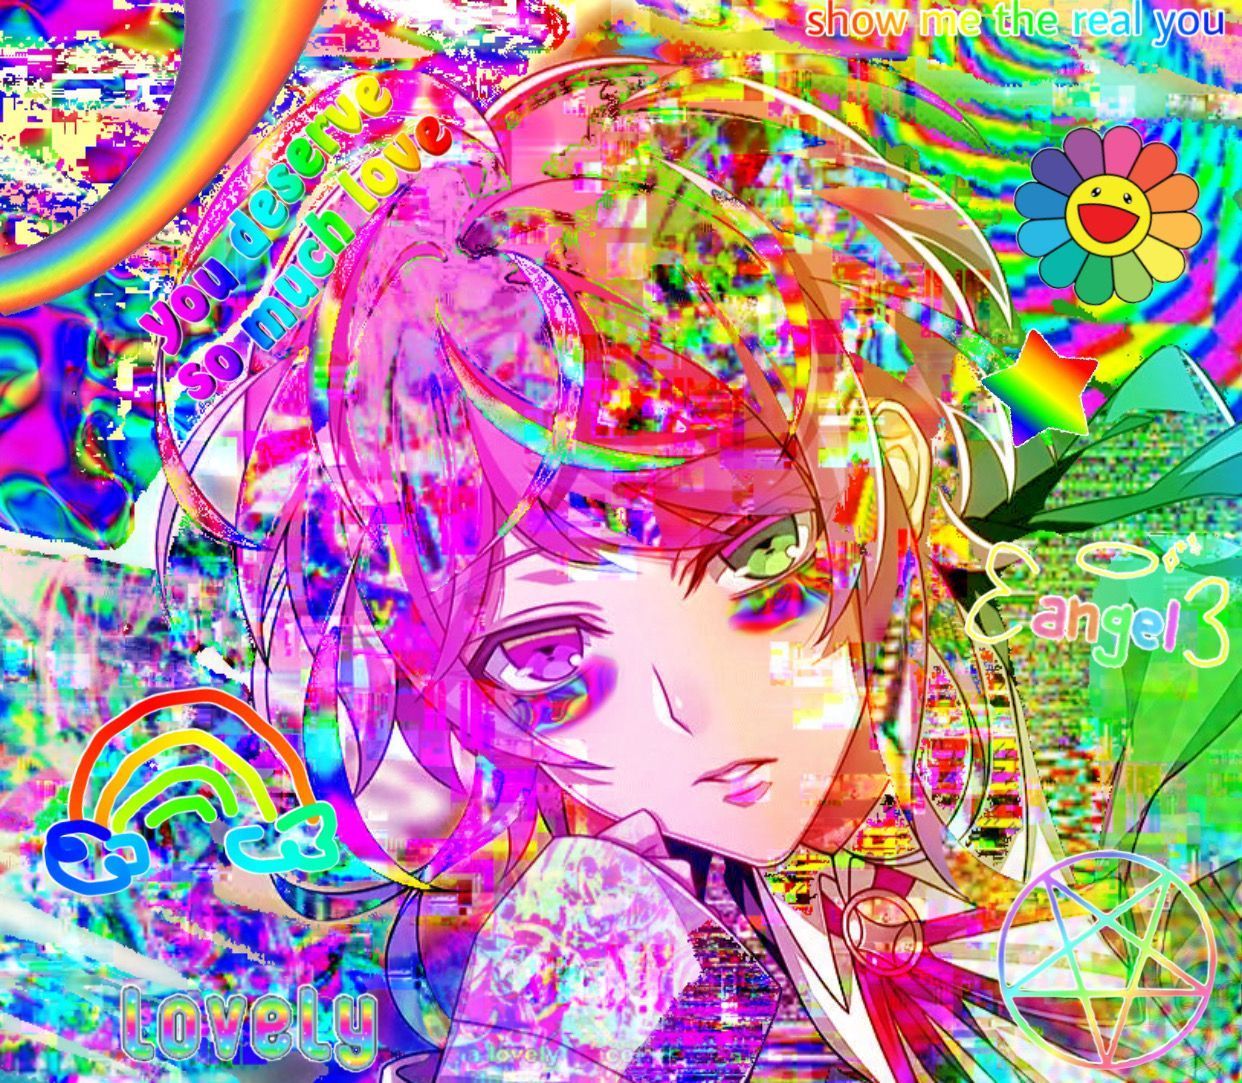 A digital artwork of a girl with pink hair and green eyes. She is surrounded by a rainbow of abstract shapes and lines. - Glitchcore, Scenecore